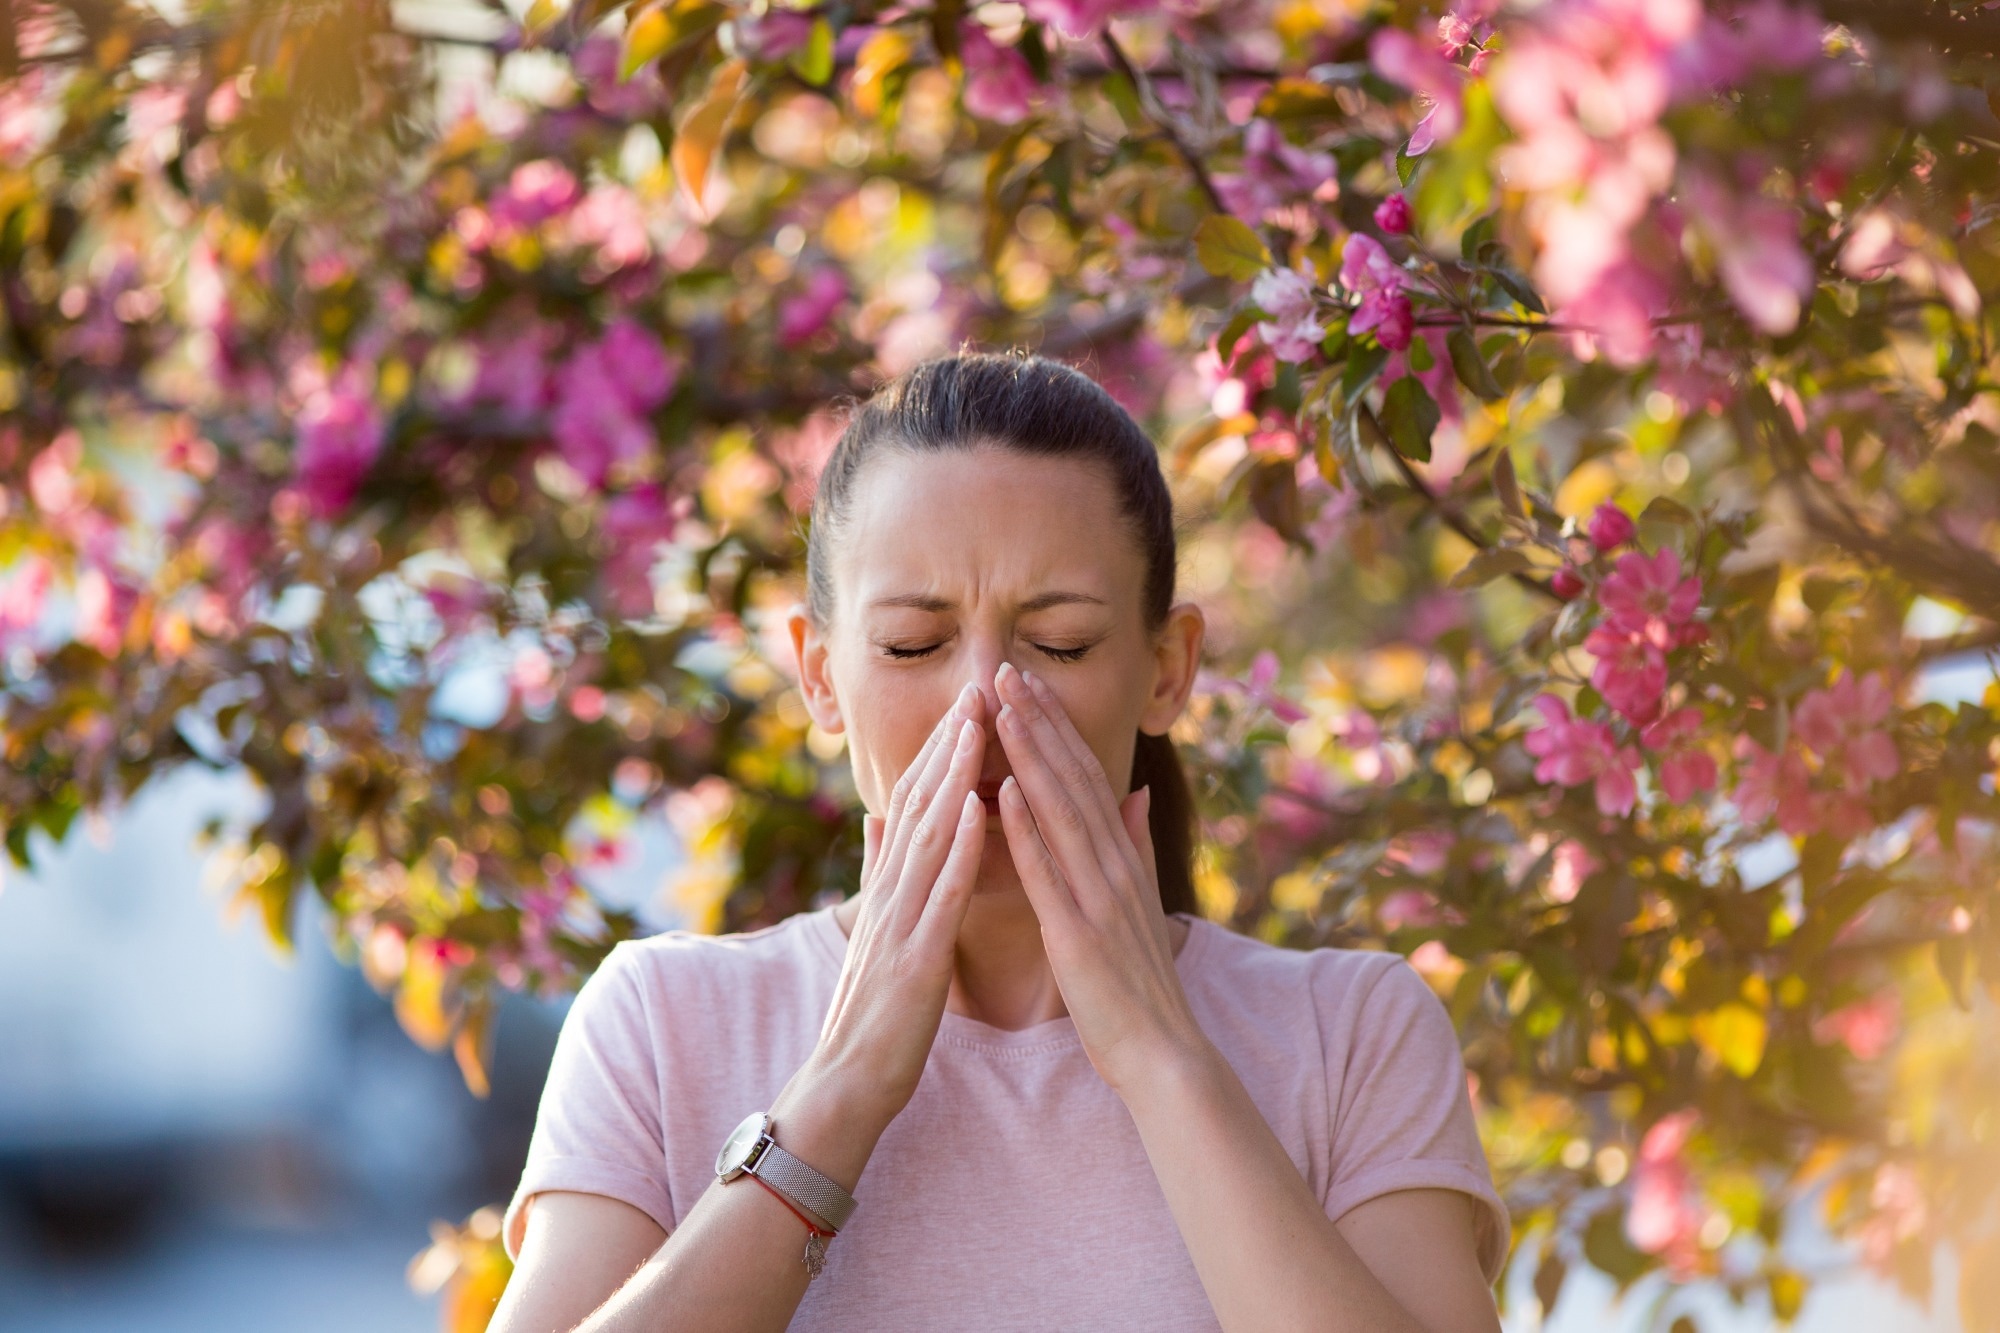 Study: Effects of combination treatment with tezepelumab and allergen immunotherapy on nasal responses to allergen: a randomized controlled trial. Image Credit: Budimir Jevtic/Shutterstock